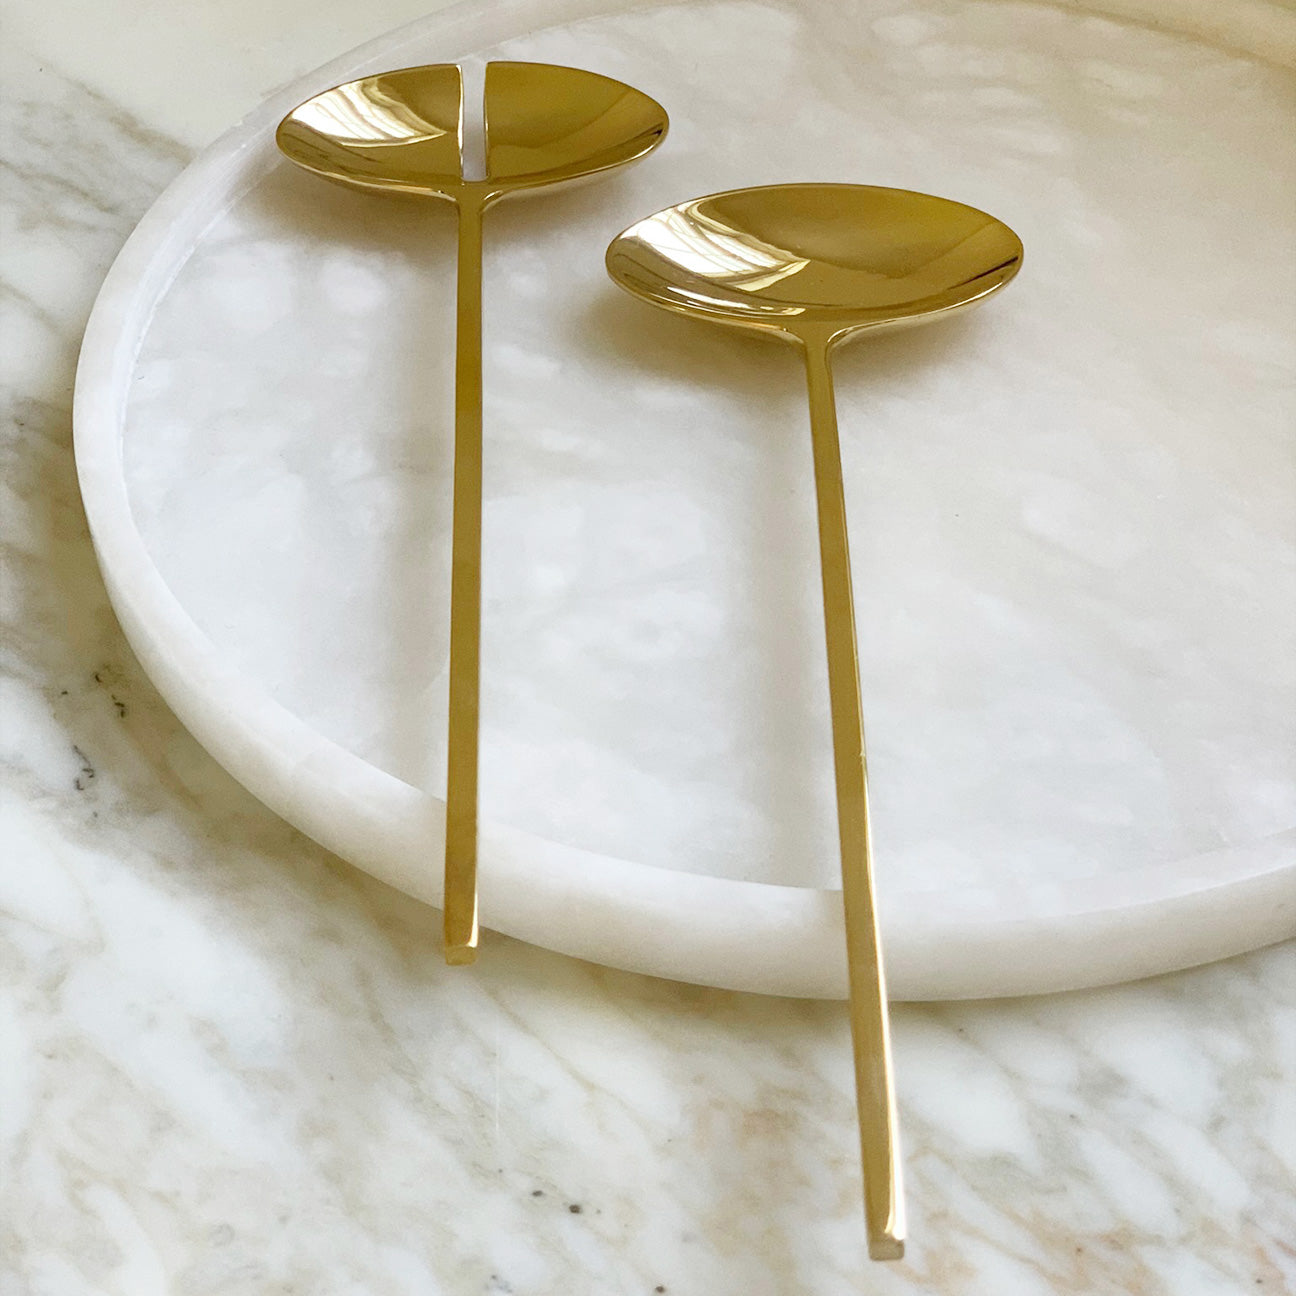 Image of M+A NYC Solid Brass Servers resting on an alabaster tray that is sitting on a marble table.